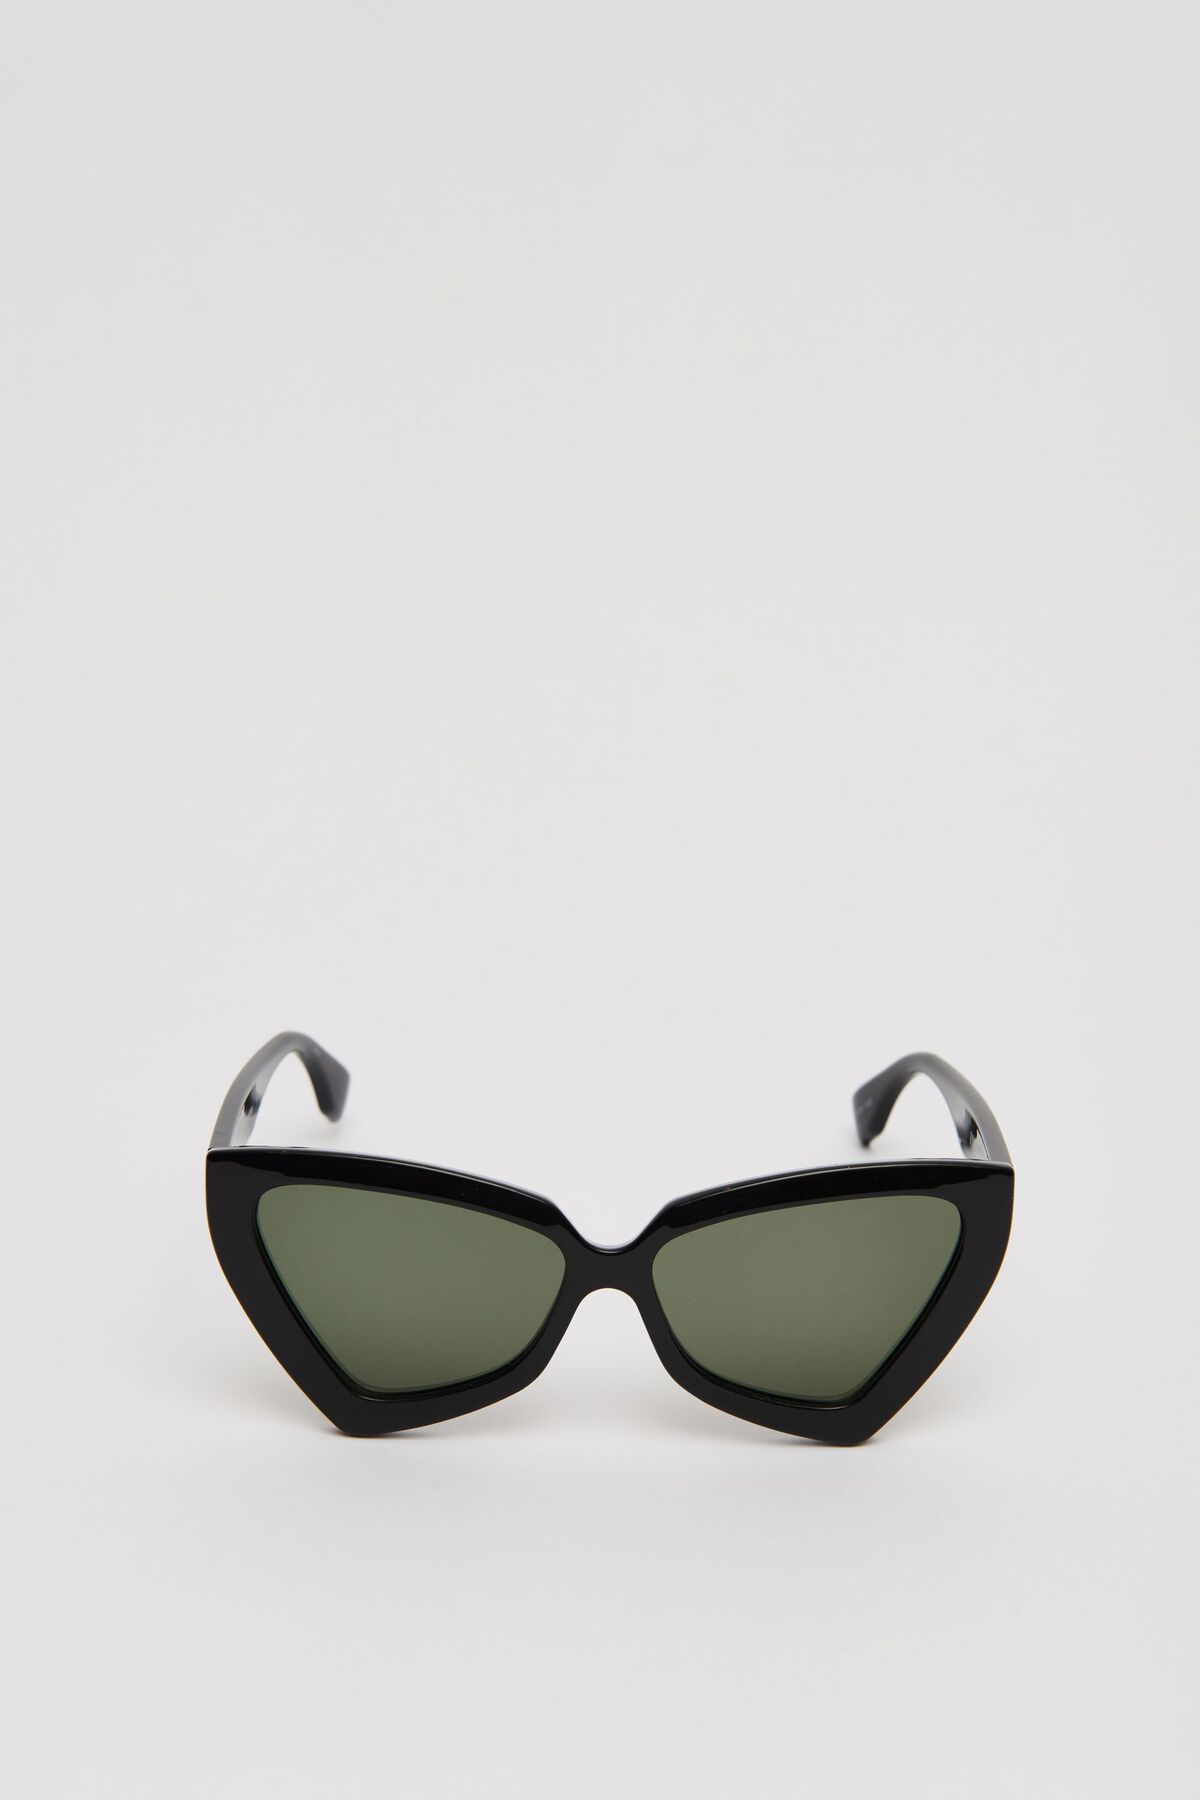 Dynamite LE SPECS | Rinky Dink Sunglasses. 2